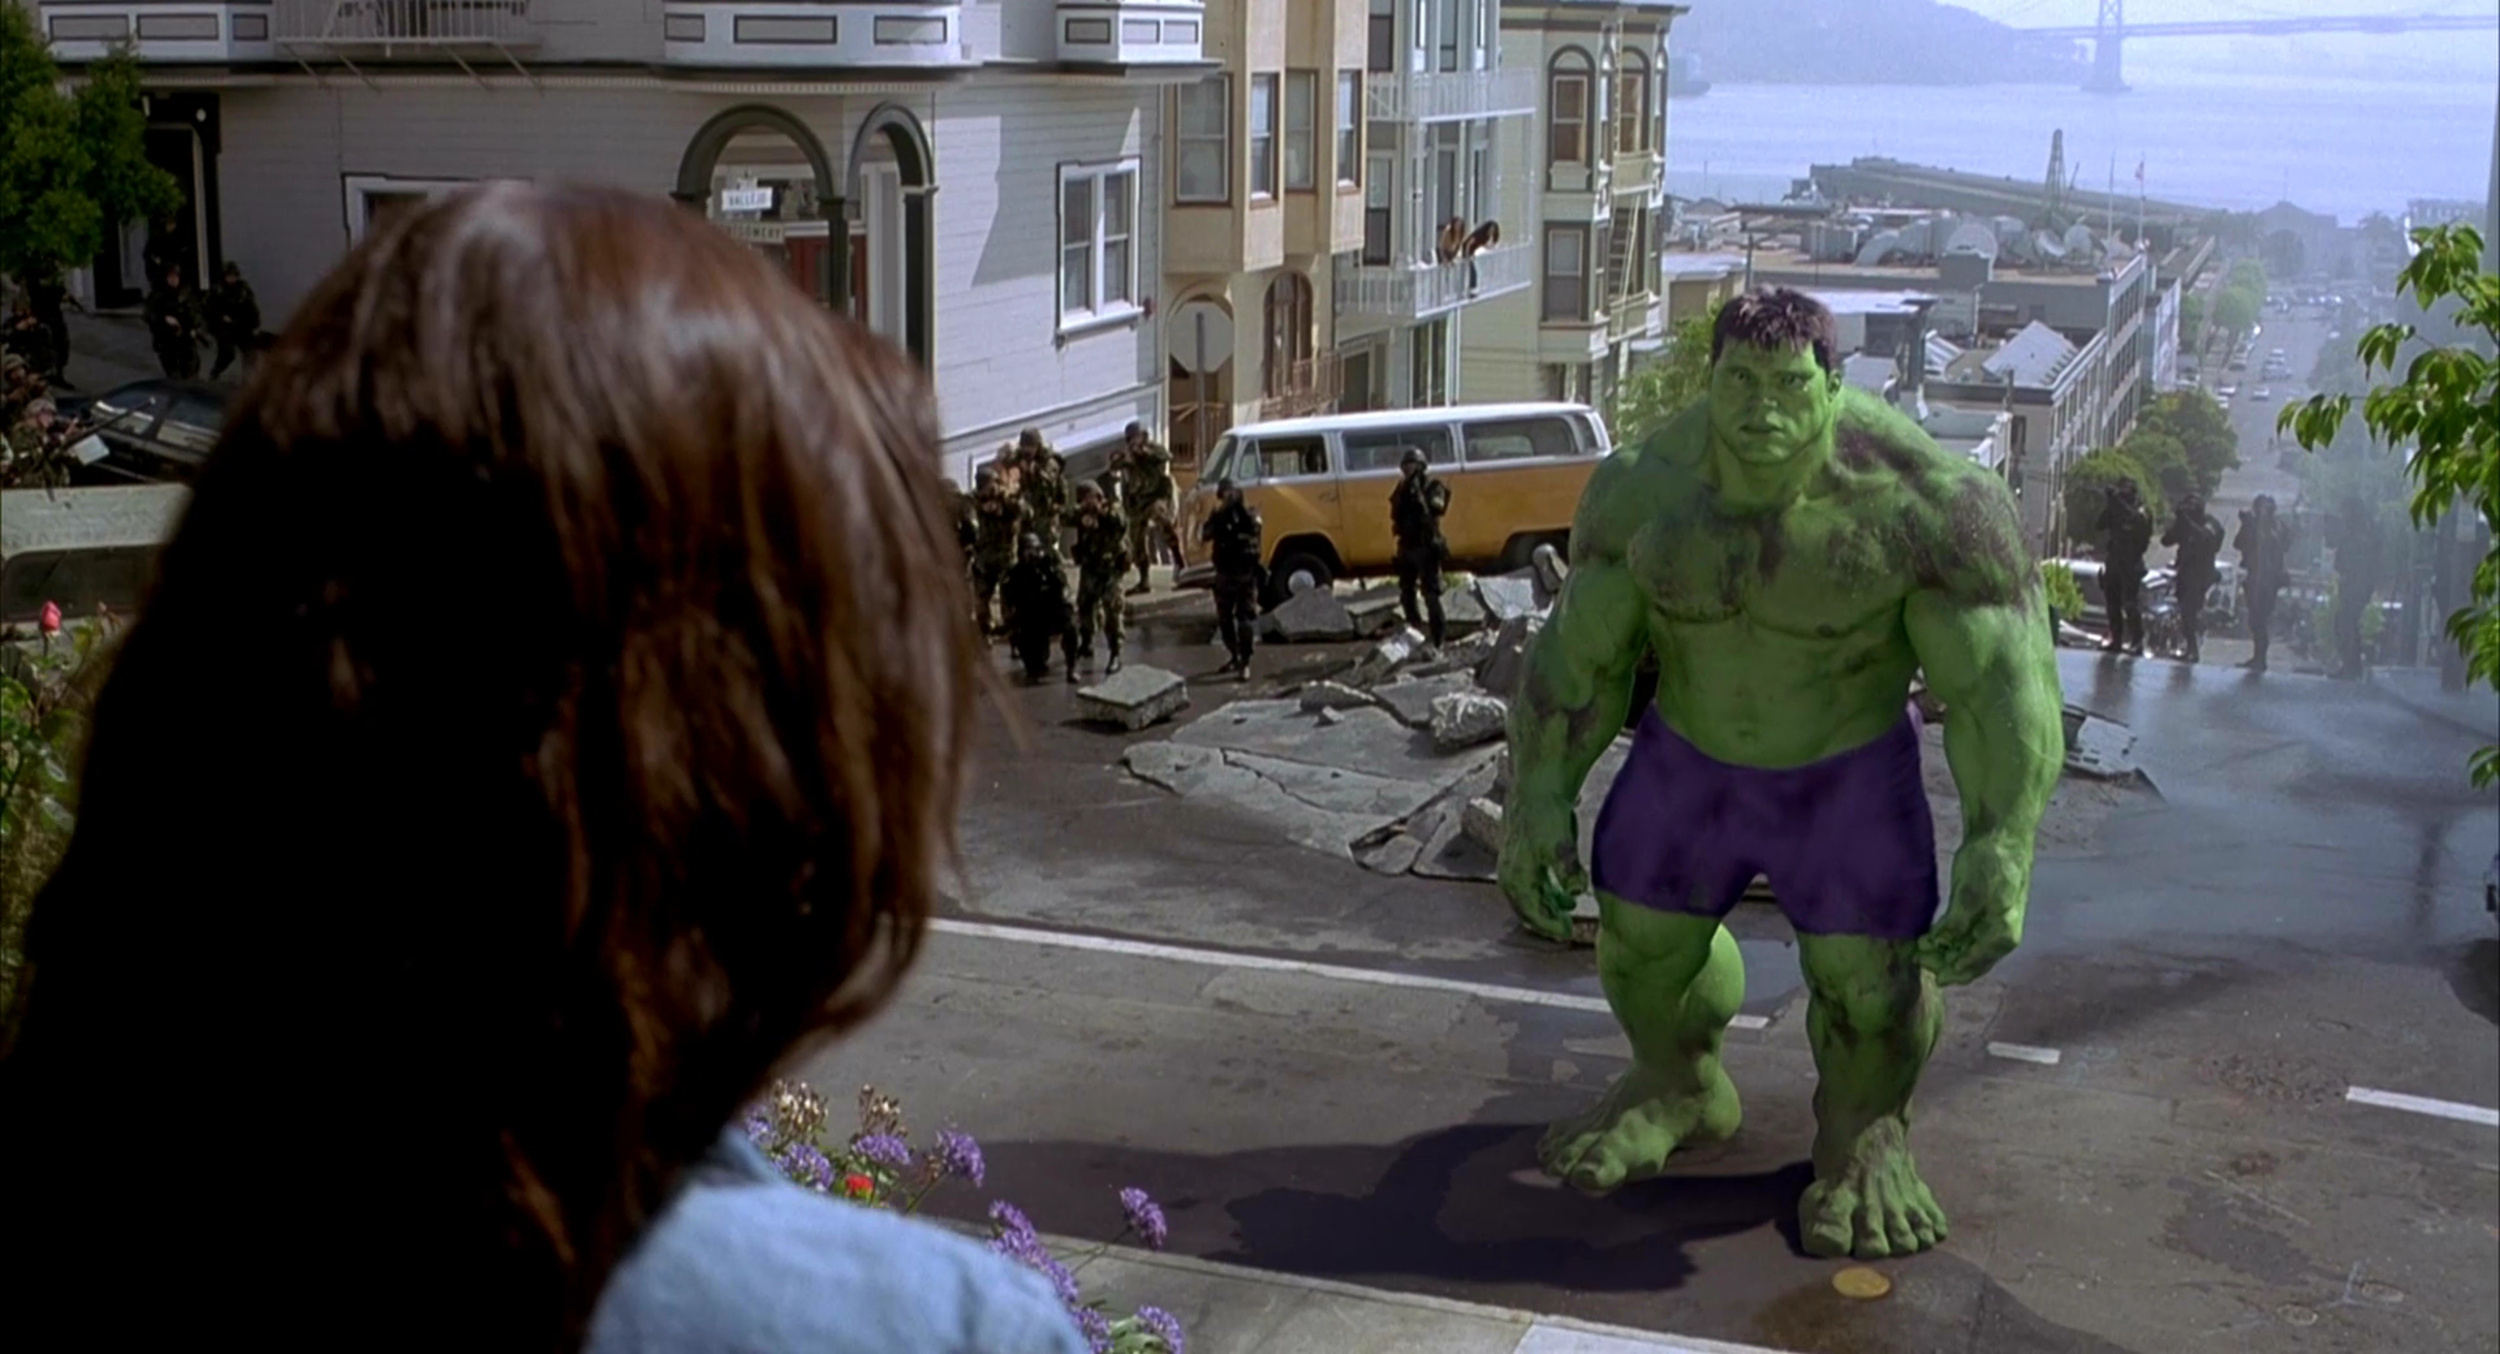 <p>Before there was the Marvel Cinematic Universe, there were Marvel movies. Before Mark Ruffalo was the Incredible Hulk, there was <em>Hulk</em>. It’s a standout film among superhero movies, but why? How did this bizarre, contemplative story about unresolved family issues — and a giant green monster man — come to fruition? Throw on some purple pants and enjoy these 20 facts you might not know about <em>Hulk</em>.</p>